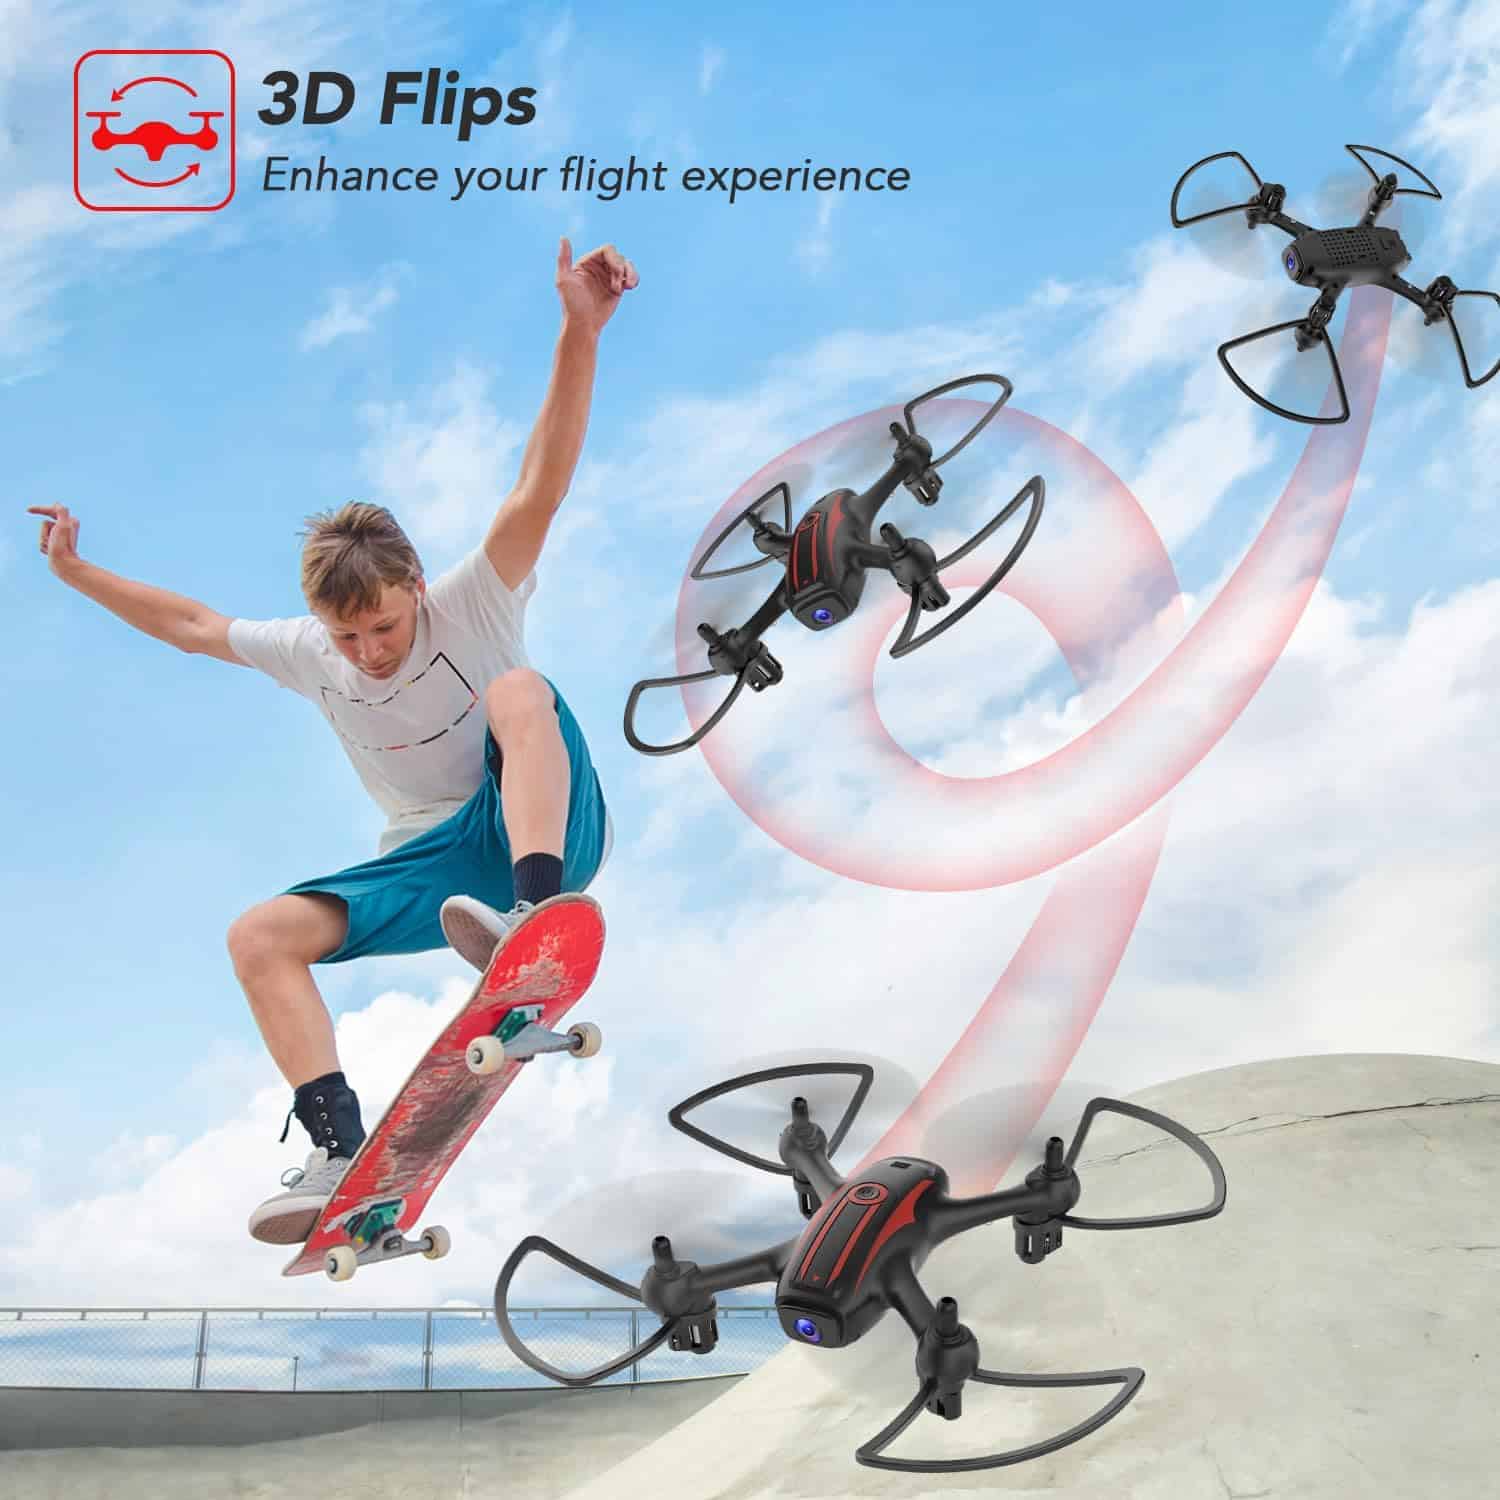 Elukiko Drone with Camera for Adults Kids: A Review of the Ultimate Flying Experience